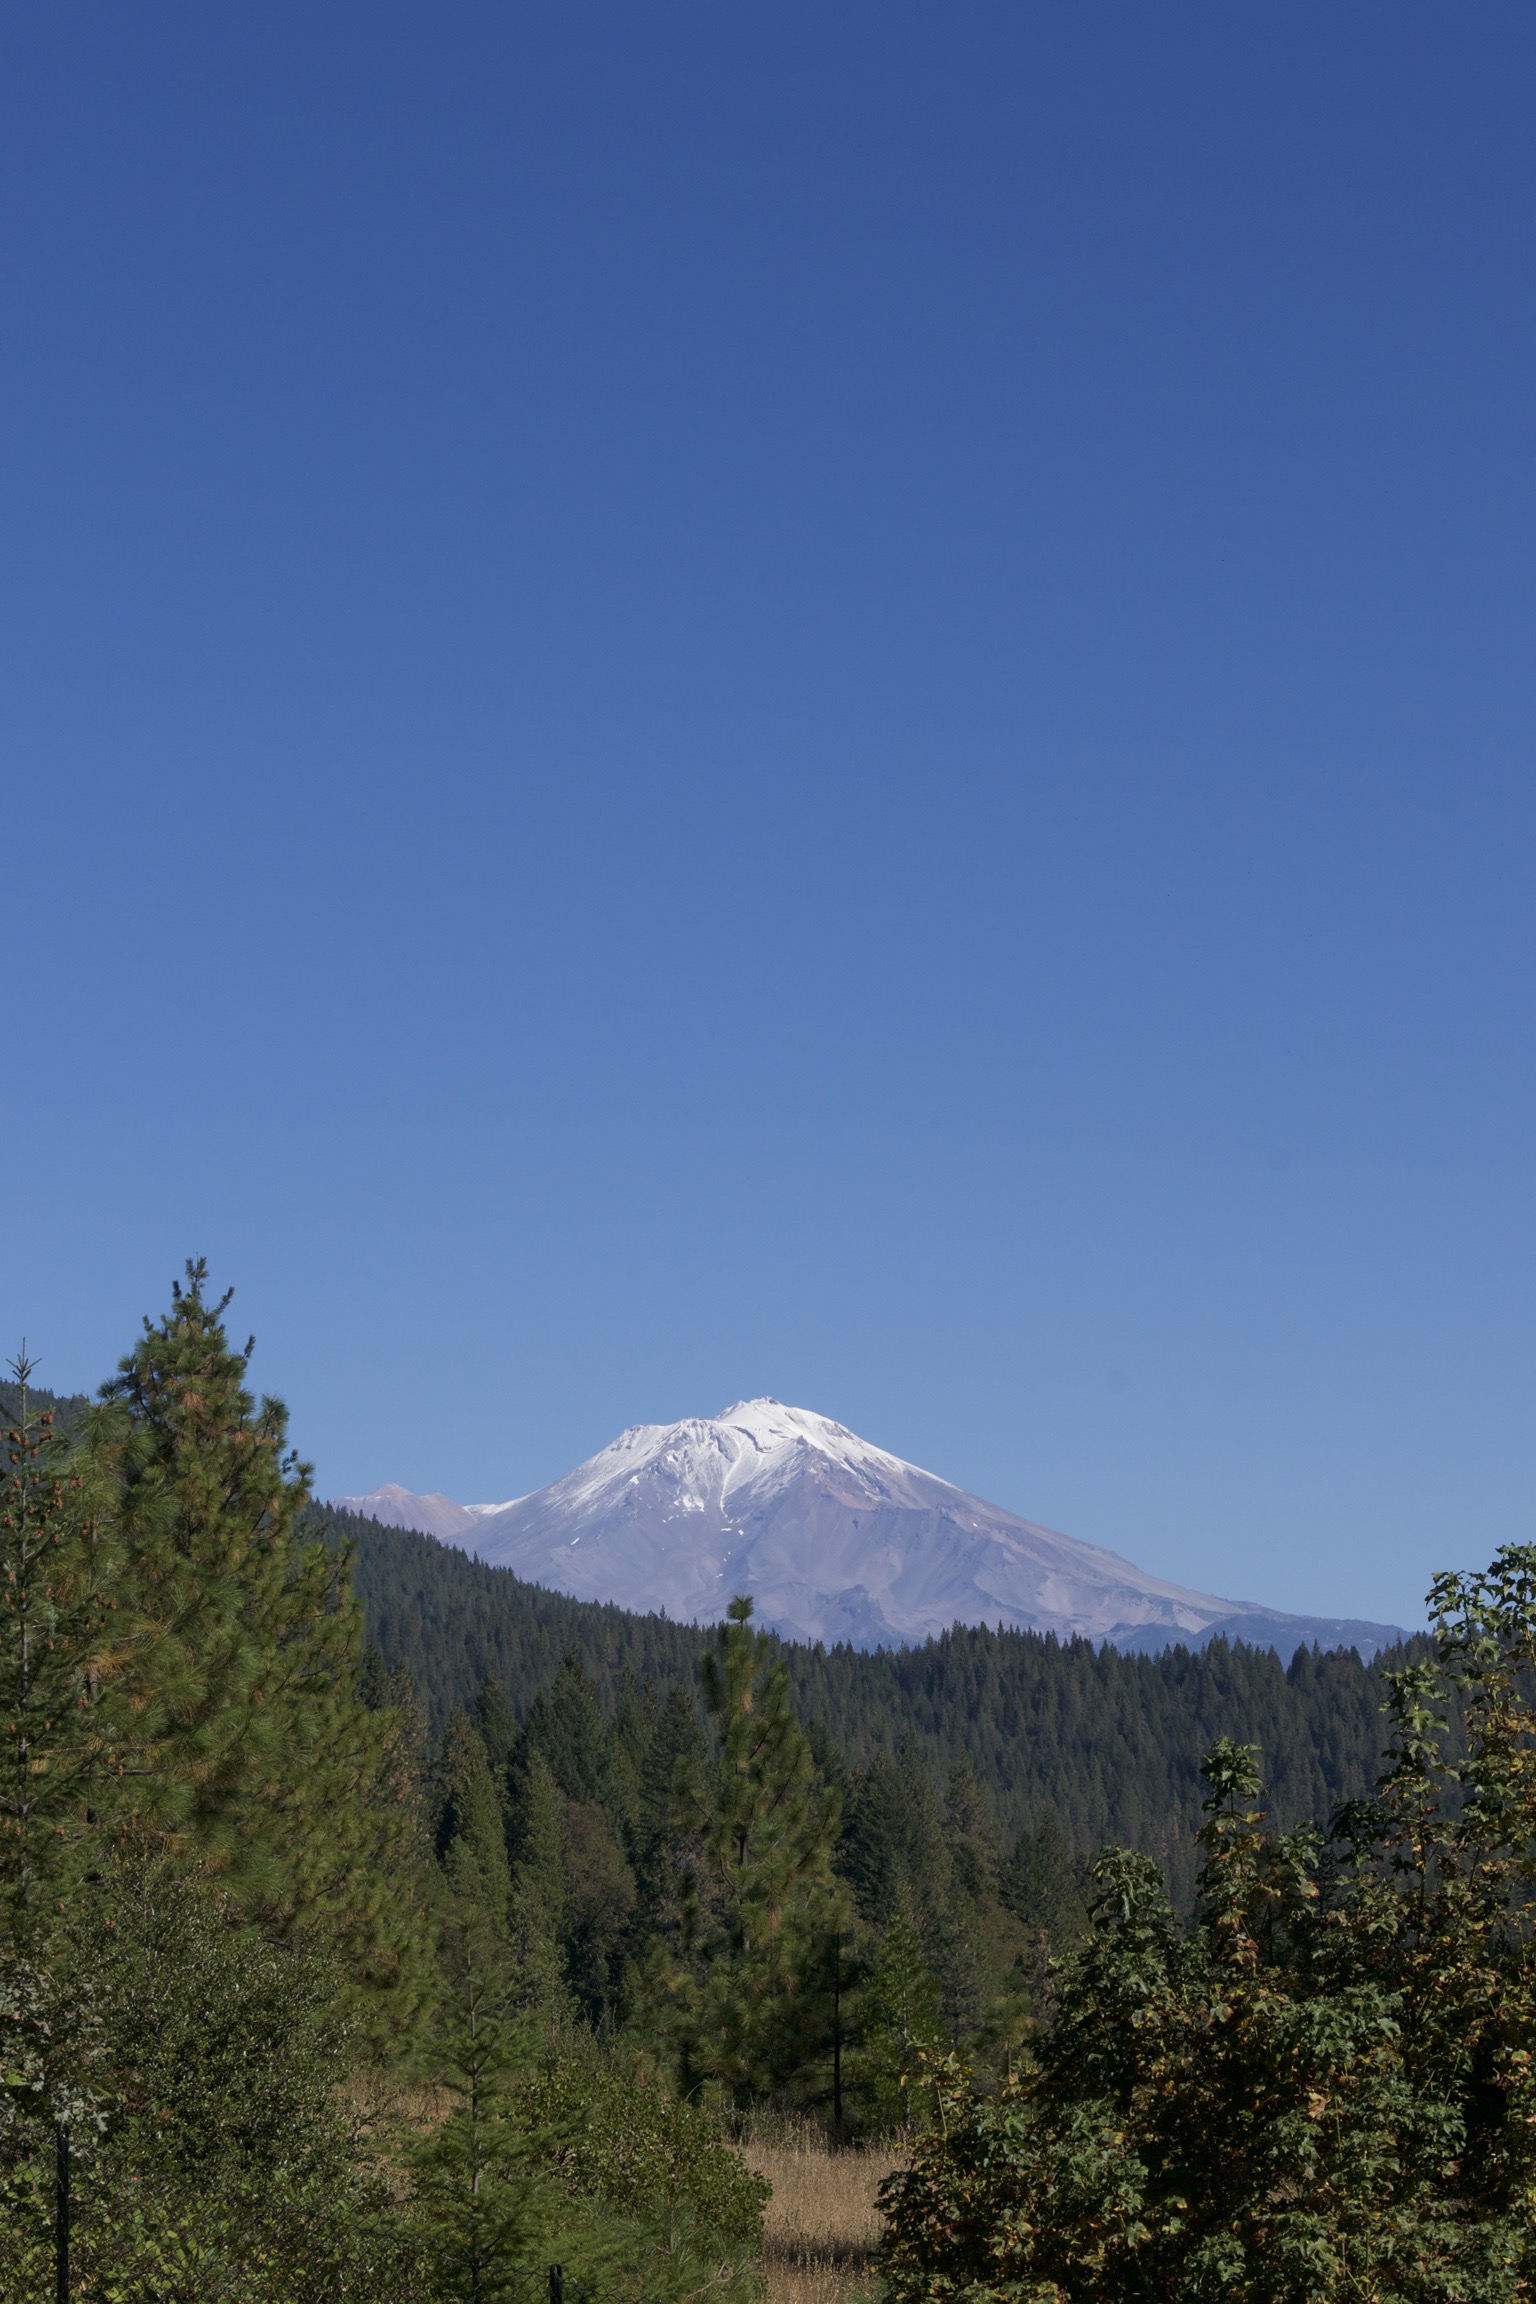 A forest of pines leads up to Shasta on the horizon, a deep blue sky overhead.